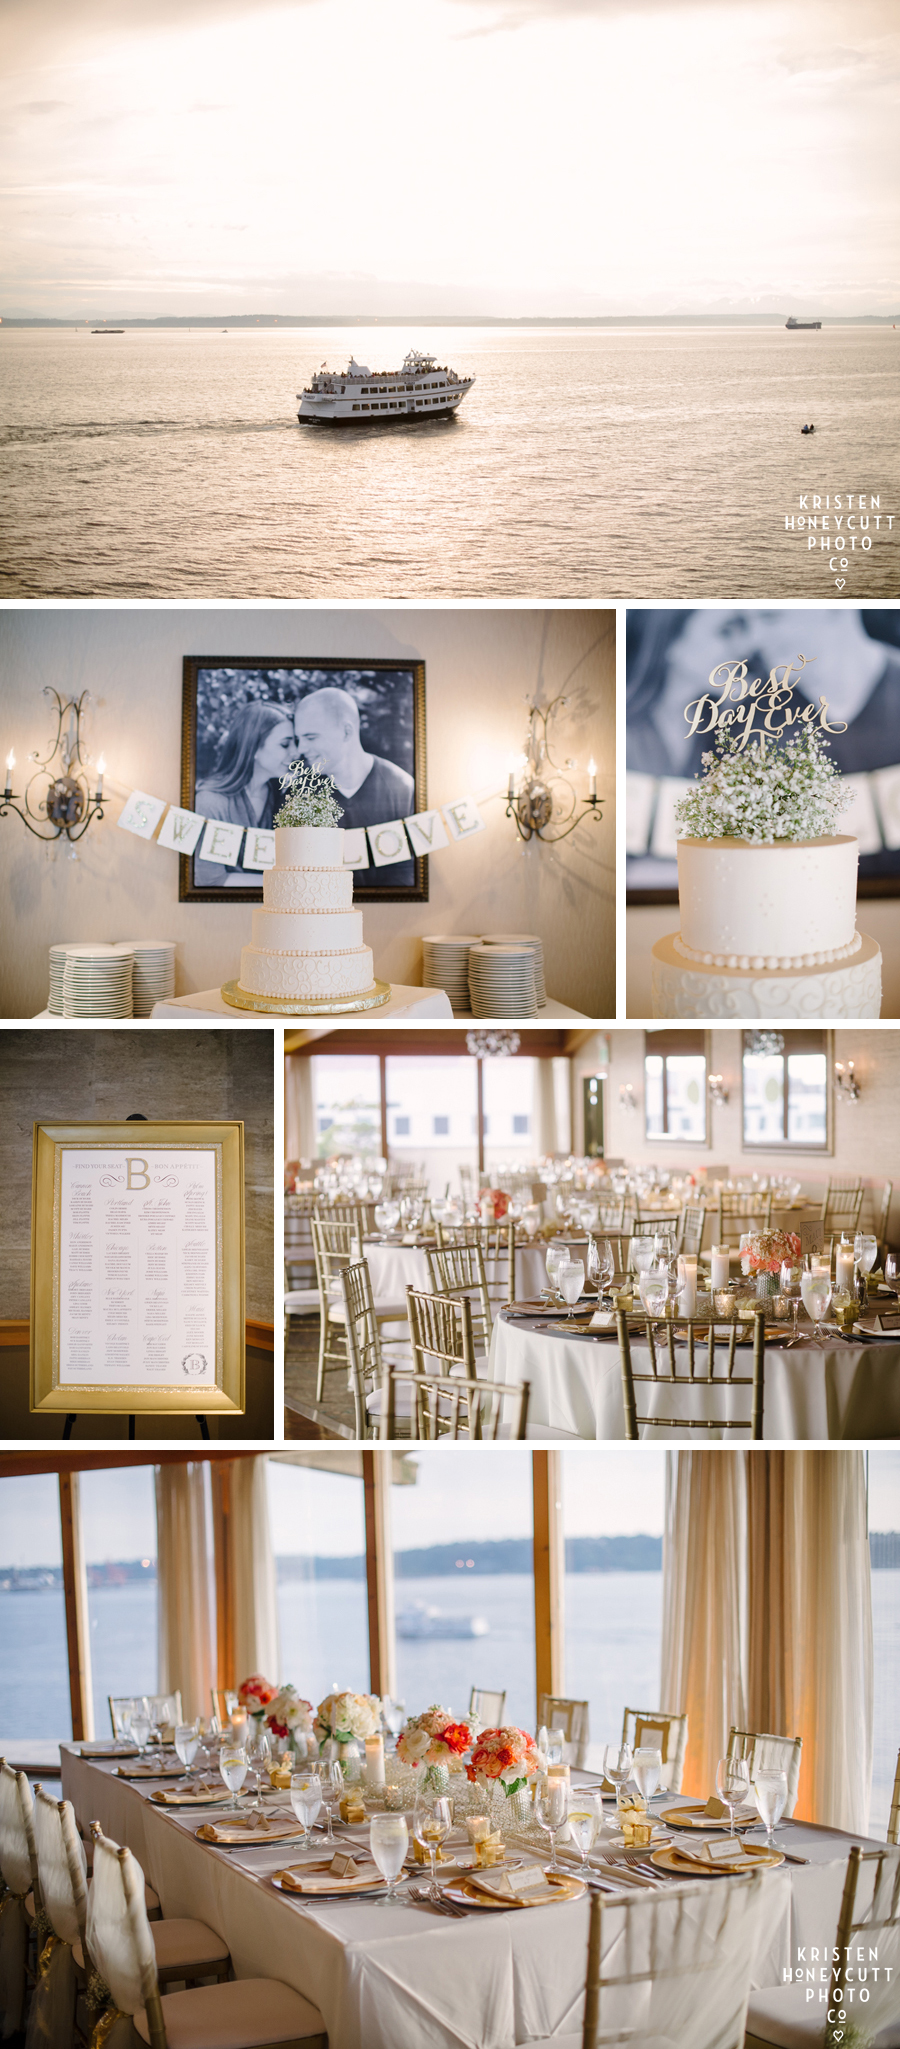 White and gold wedding cake and reception decor at the Edgewater Hotel Seattle